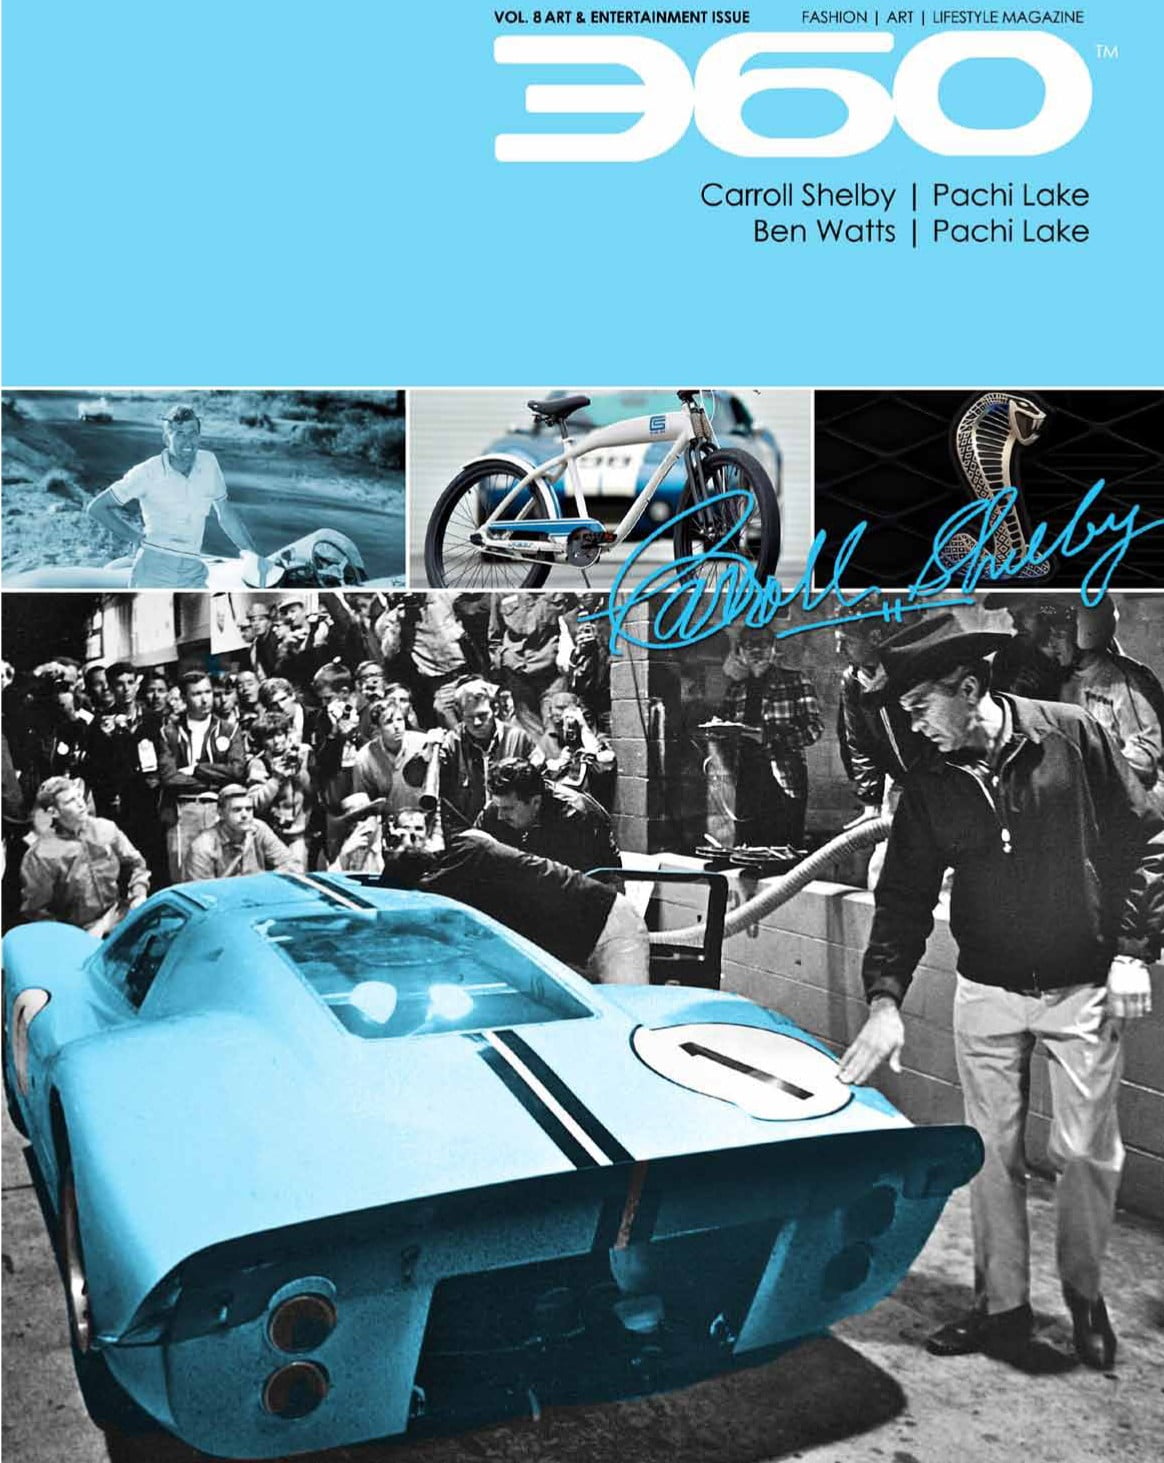 360 Issue 22 – Carroll Shelby